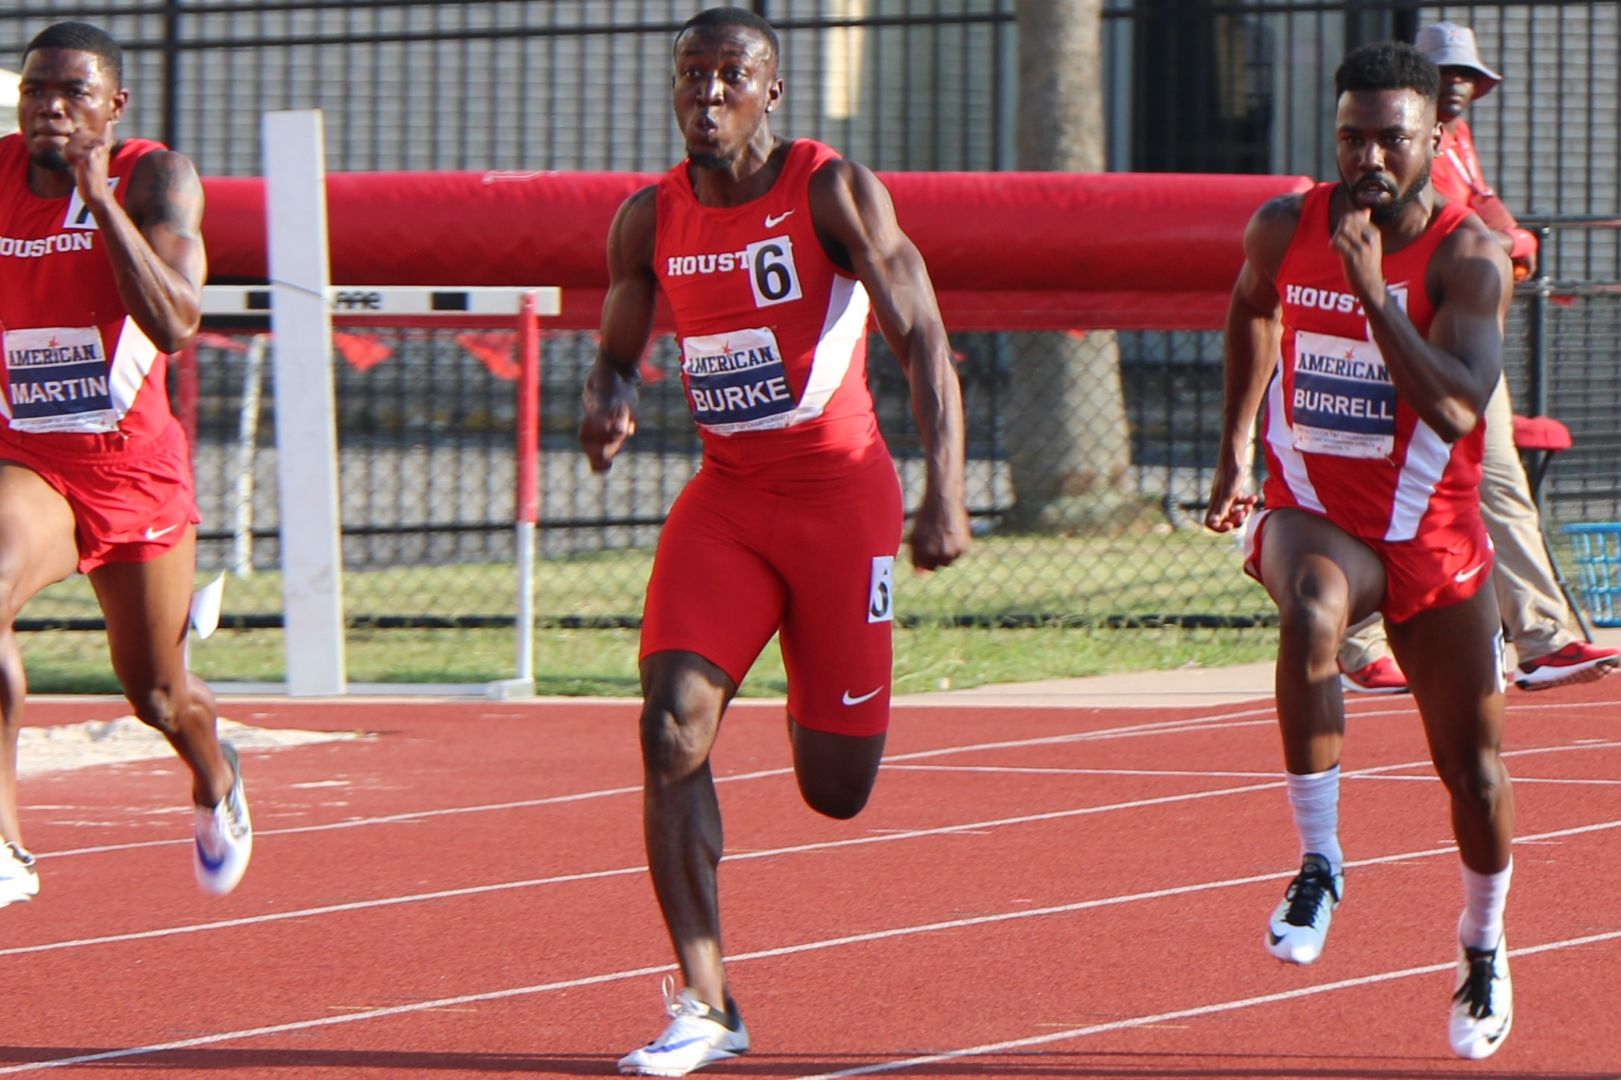 Former Cougar Mario Burke will compete at the World Track and Field Championships in Doha, Qatar. | File photo